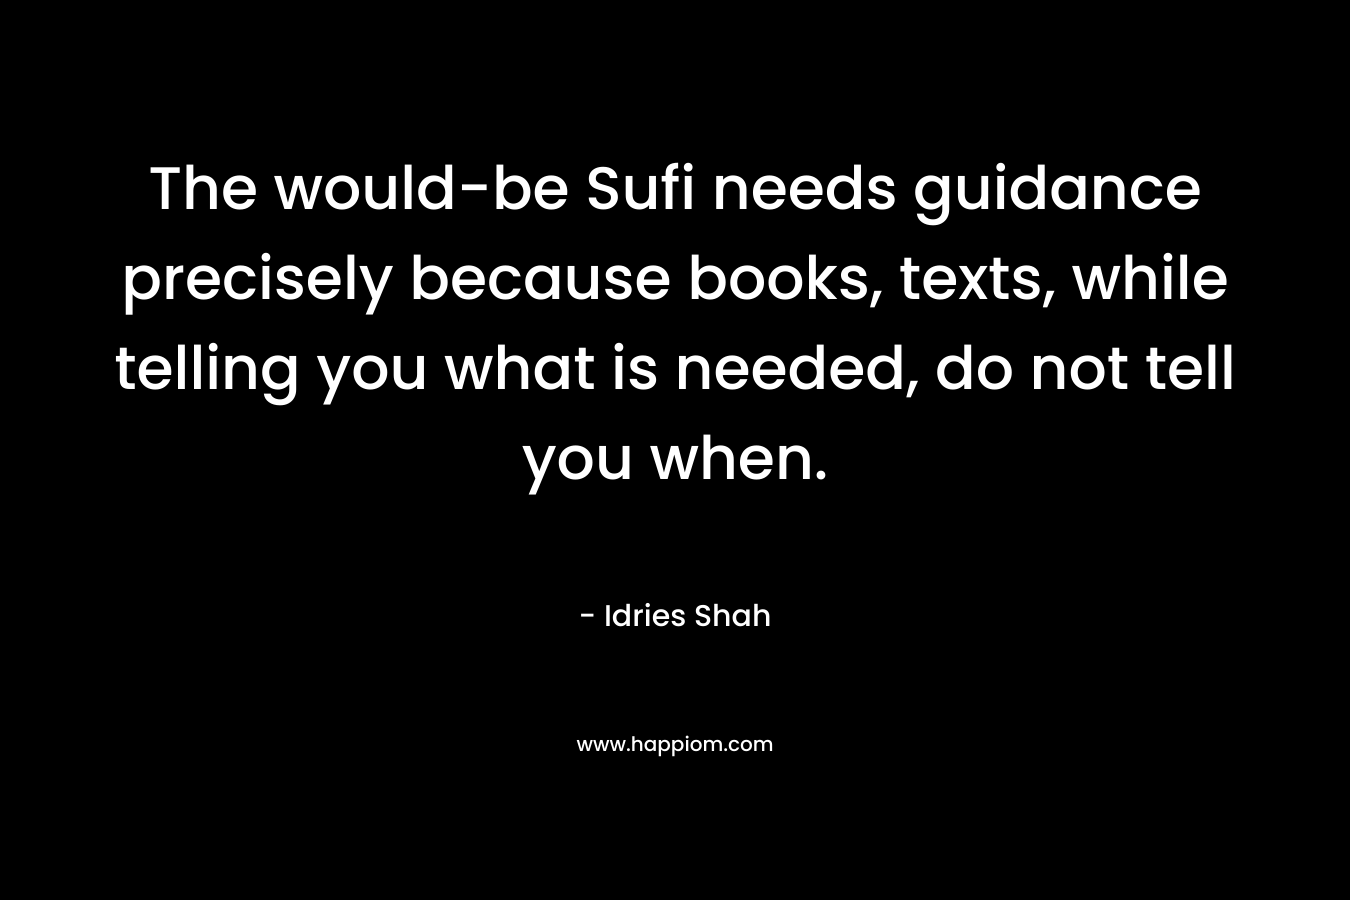 The would-be Sufi needs guidance precisely because books, texts, while telling you what is needed, do not tell you when. – Idries Shah